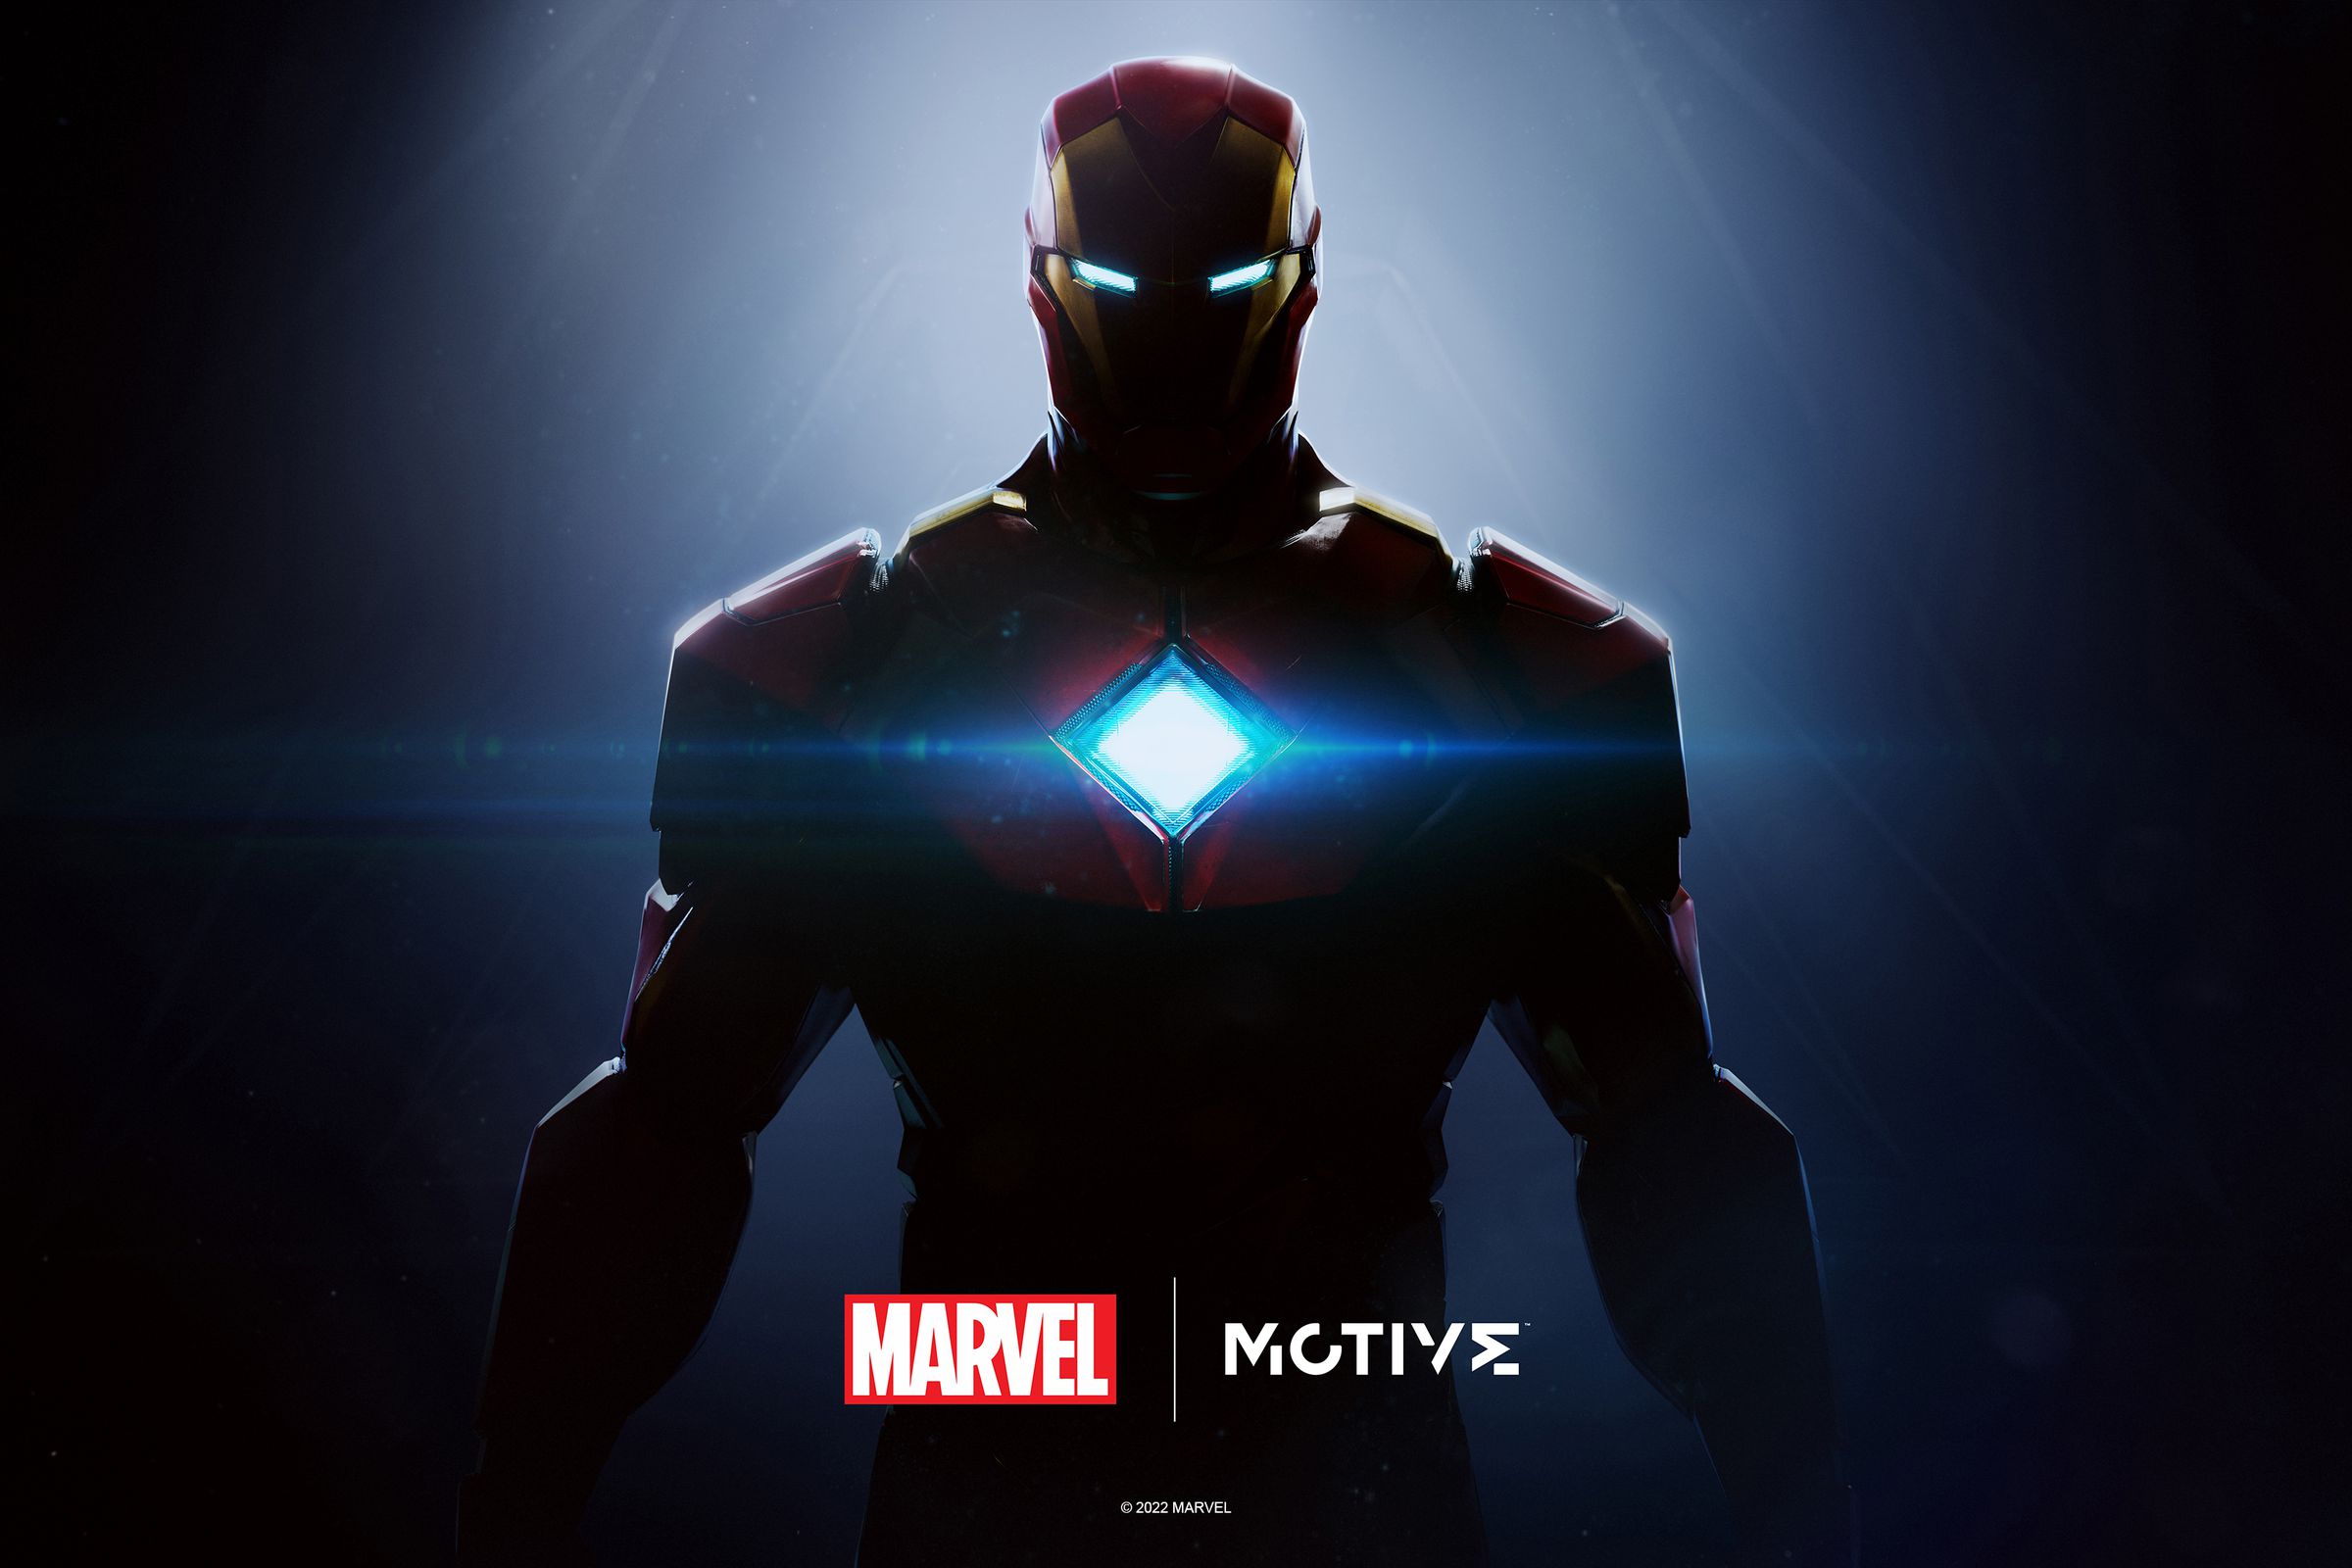 Iron Man stands before a white light. The Arc Reactor in his suit glows blue. The logos for Marvel and Motive are at the bottom of the screen.